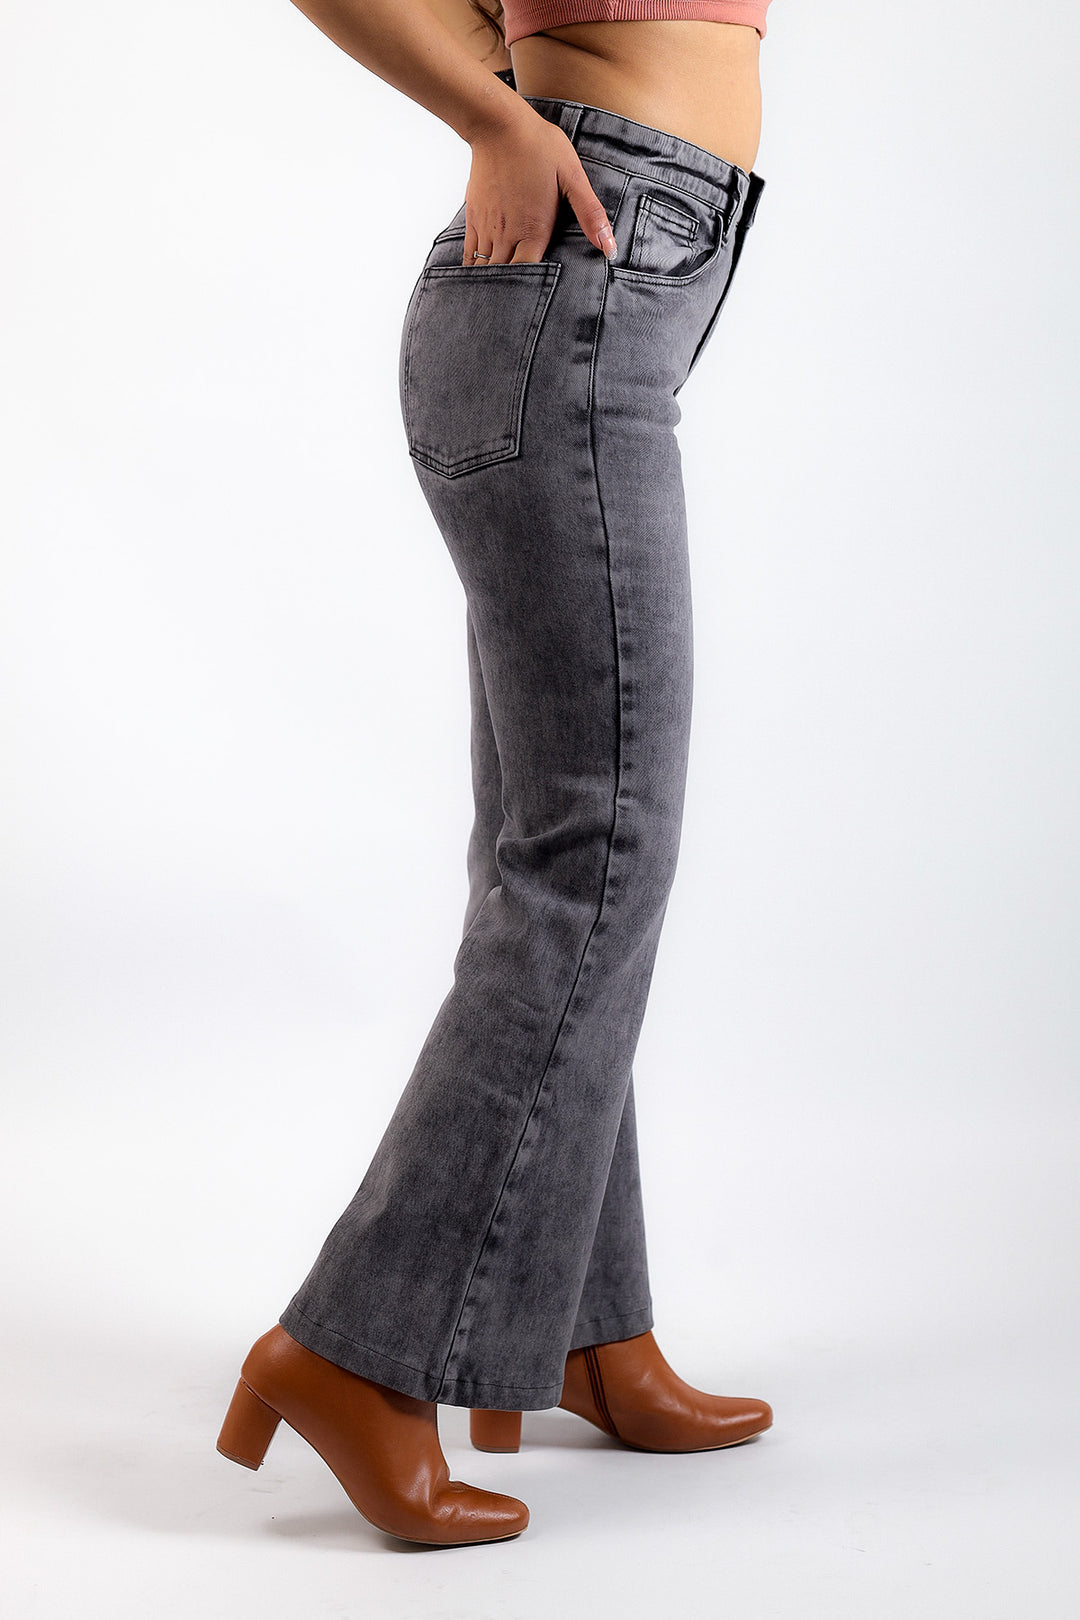 Boot Cut Whisker Washed Jeans - Grey